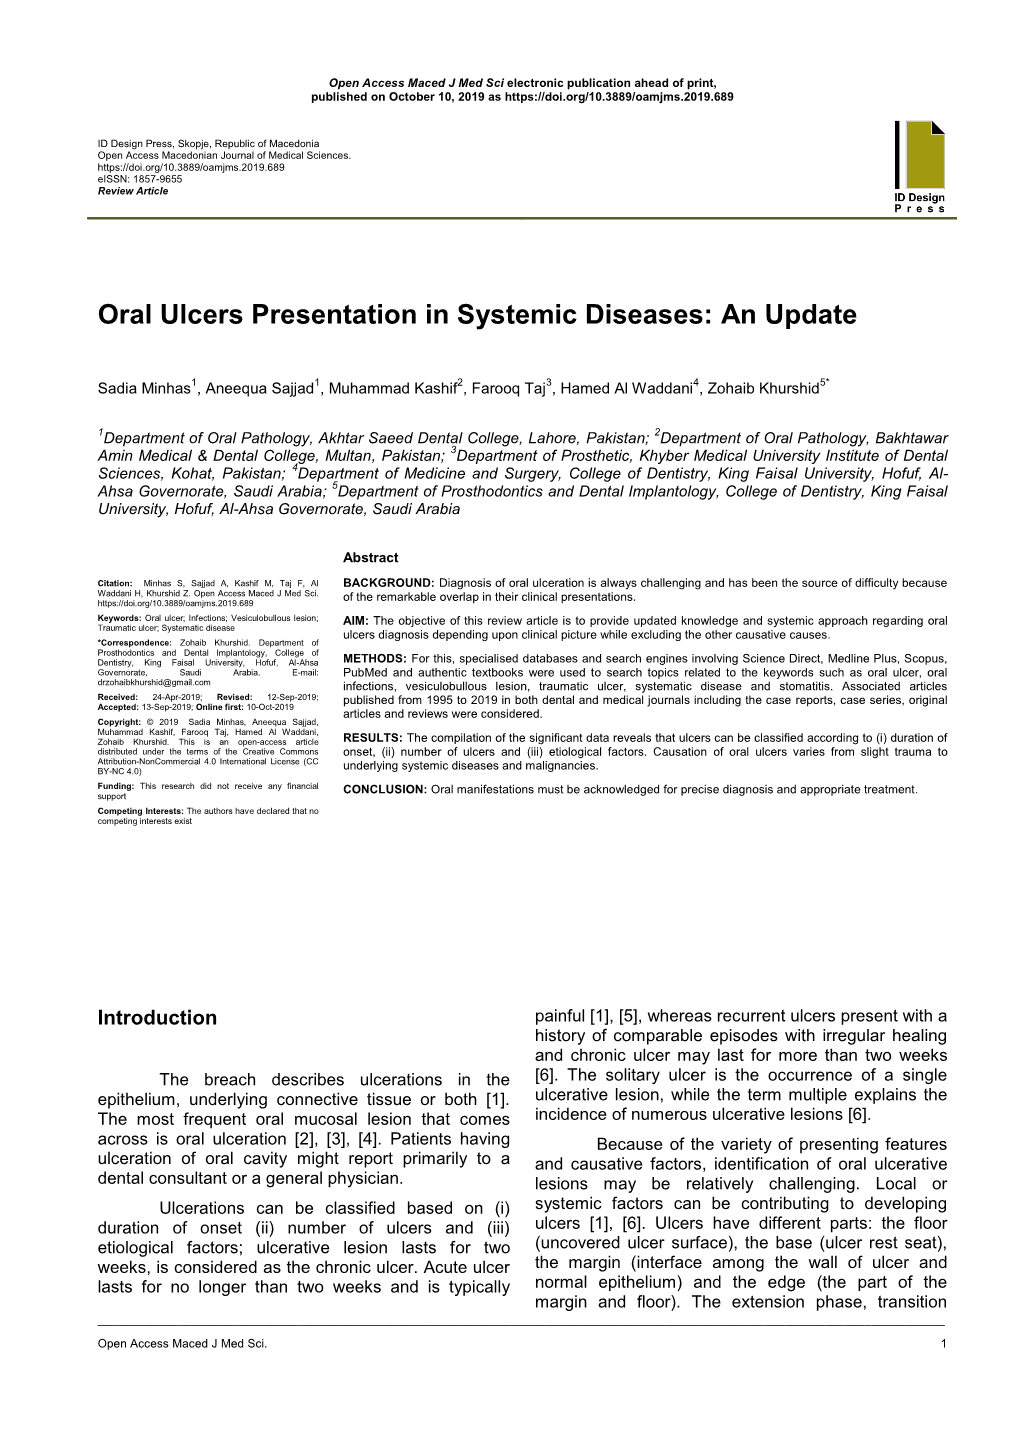 Oral Ulcers Presentation in Systemic Diseases: an Update